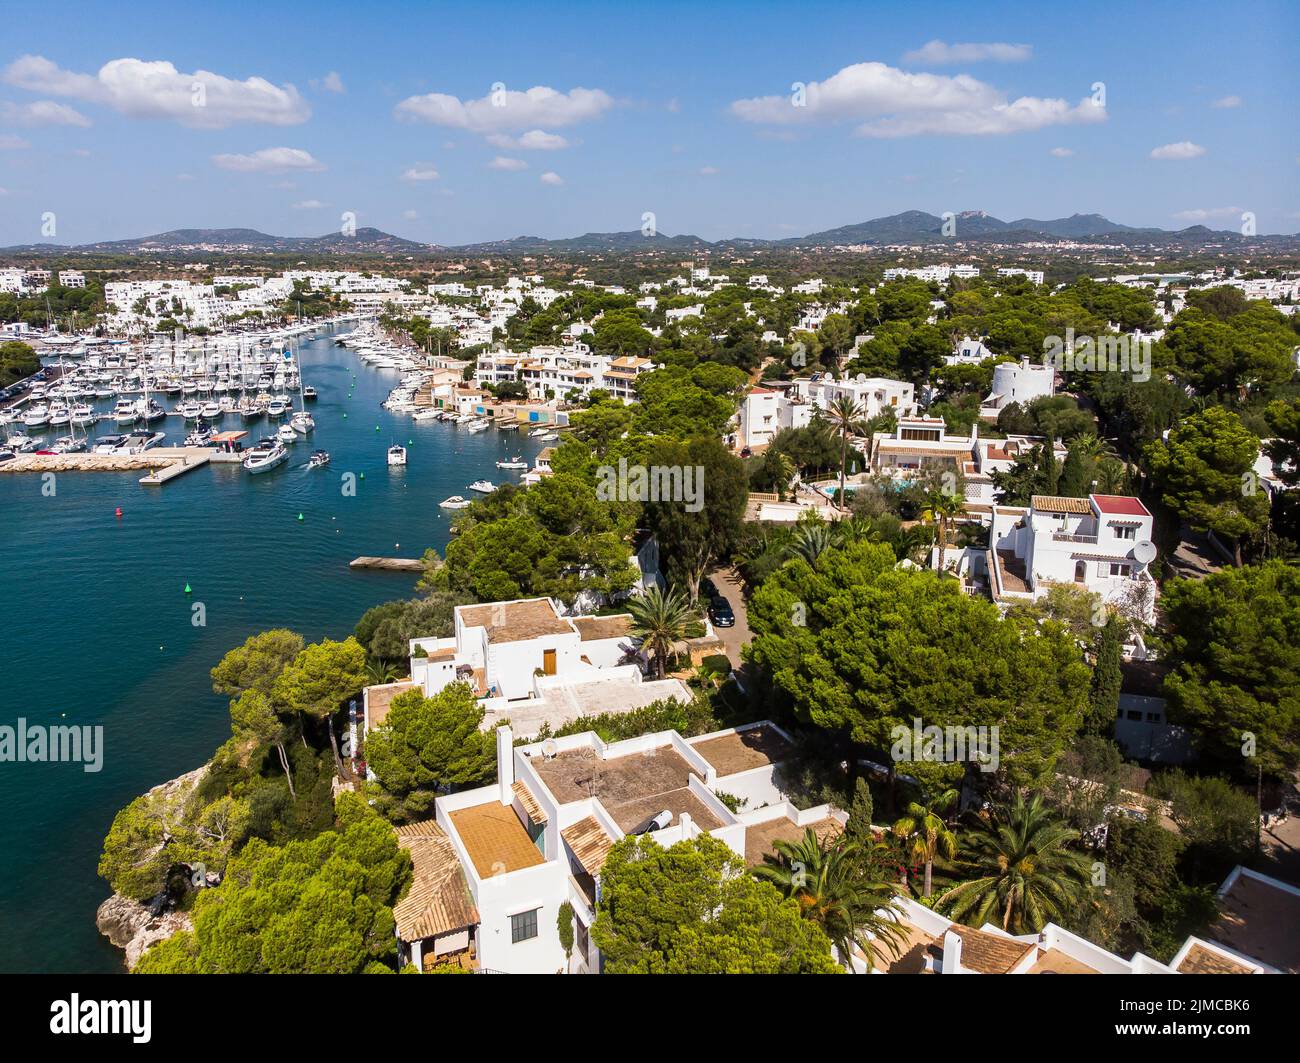 Aerial view, Spain, Balearic Islands, Majorca, Cala D'or Cala Ferrera with houses and villas Stock Photo